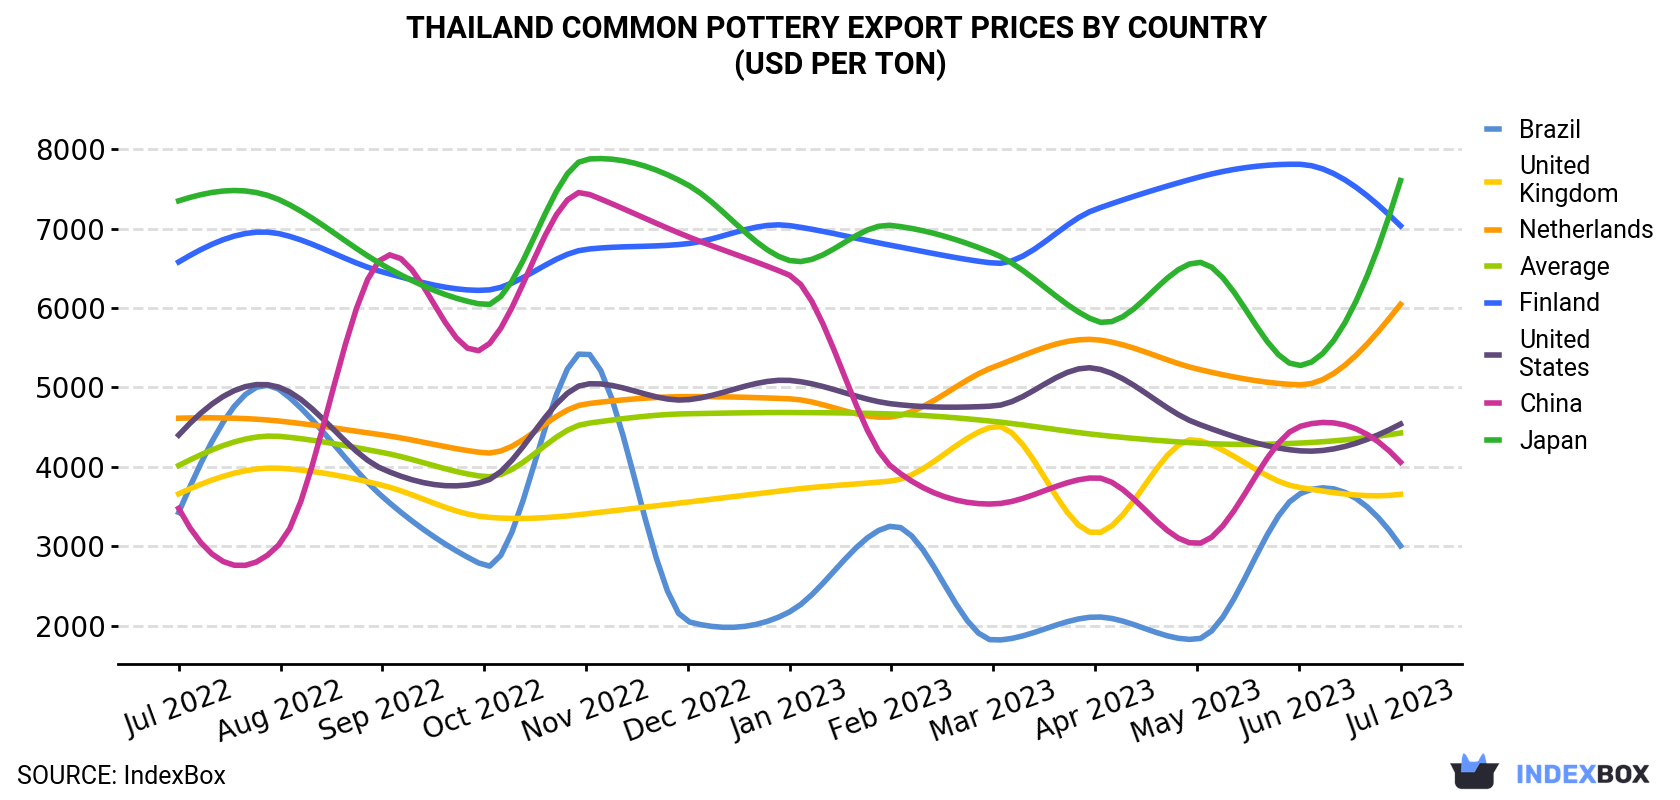 Thailand Common Pottery Export Prices By Country (USD Per Ton)